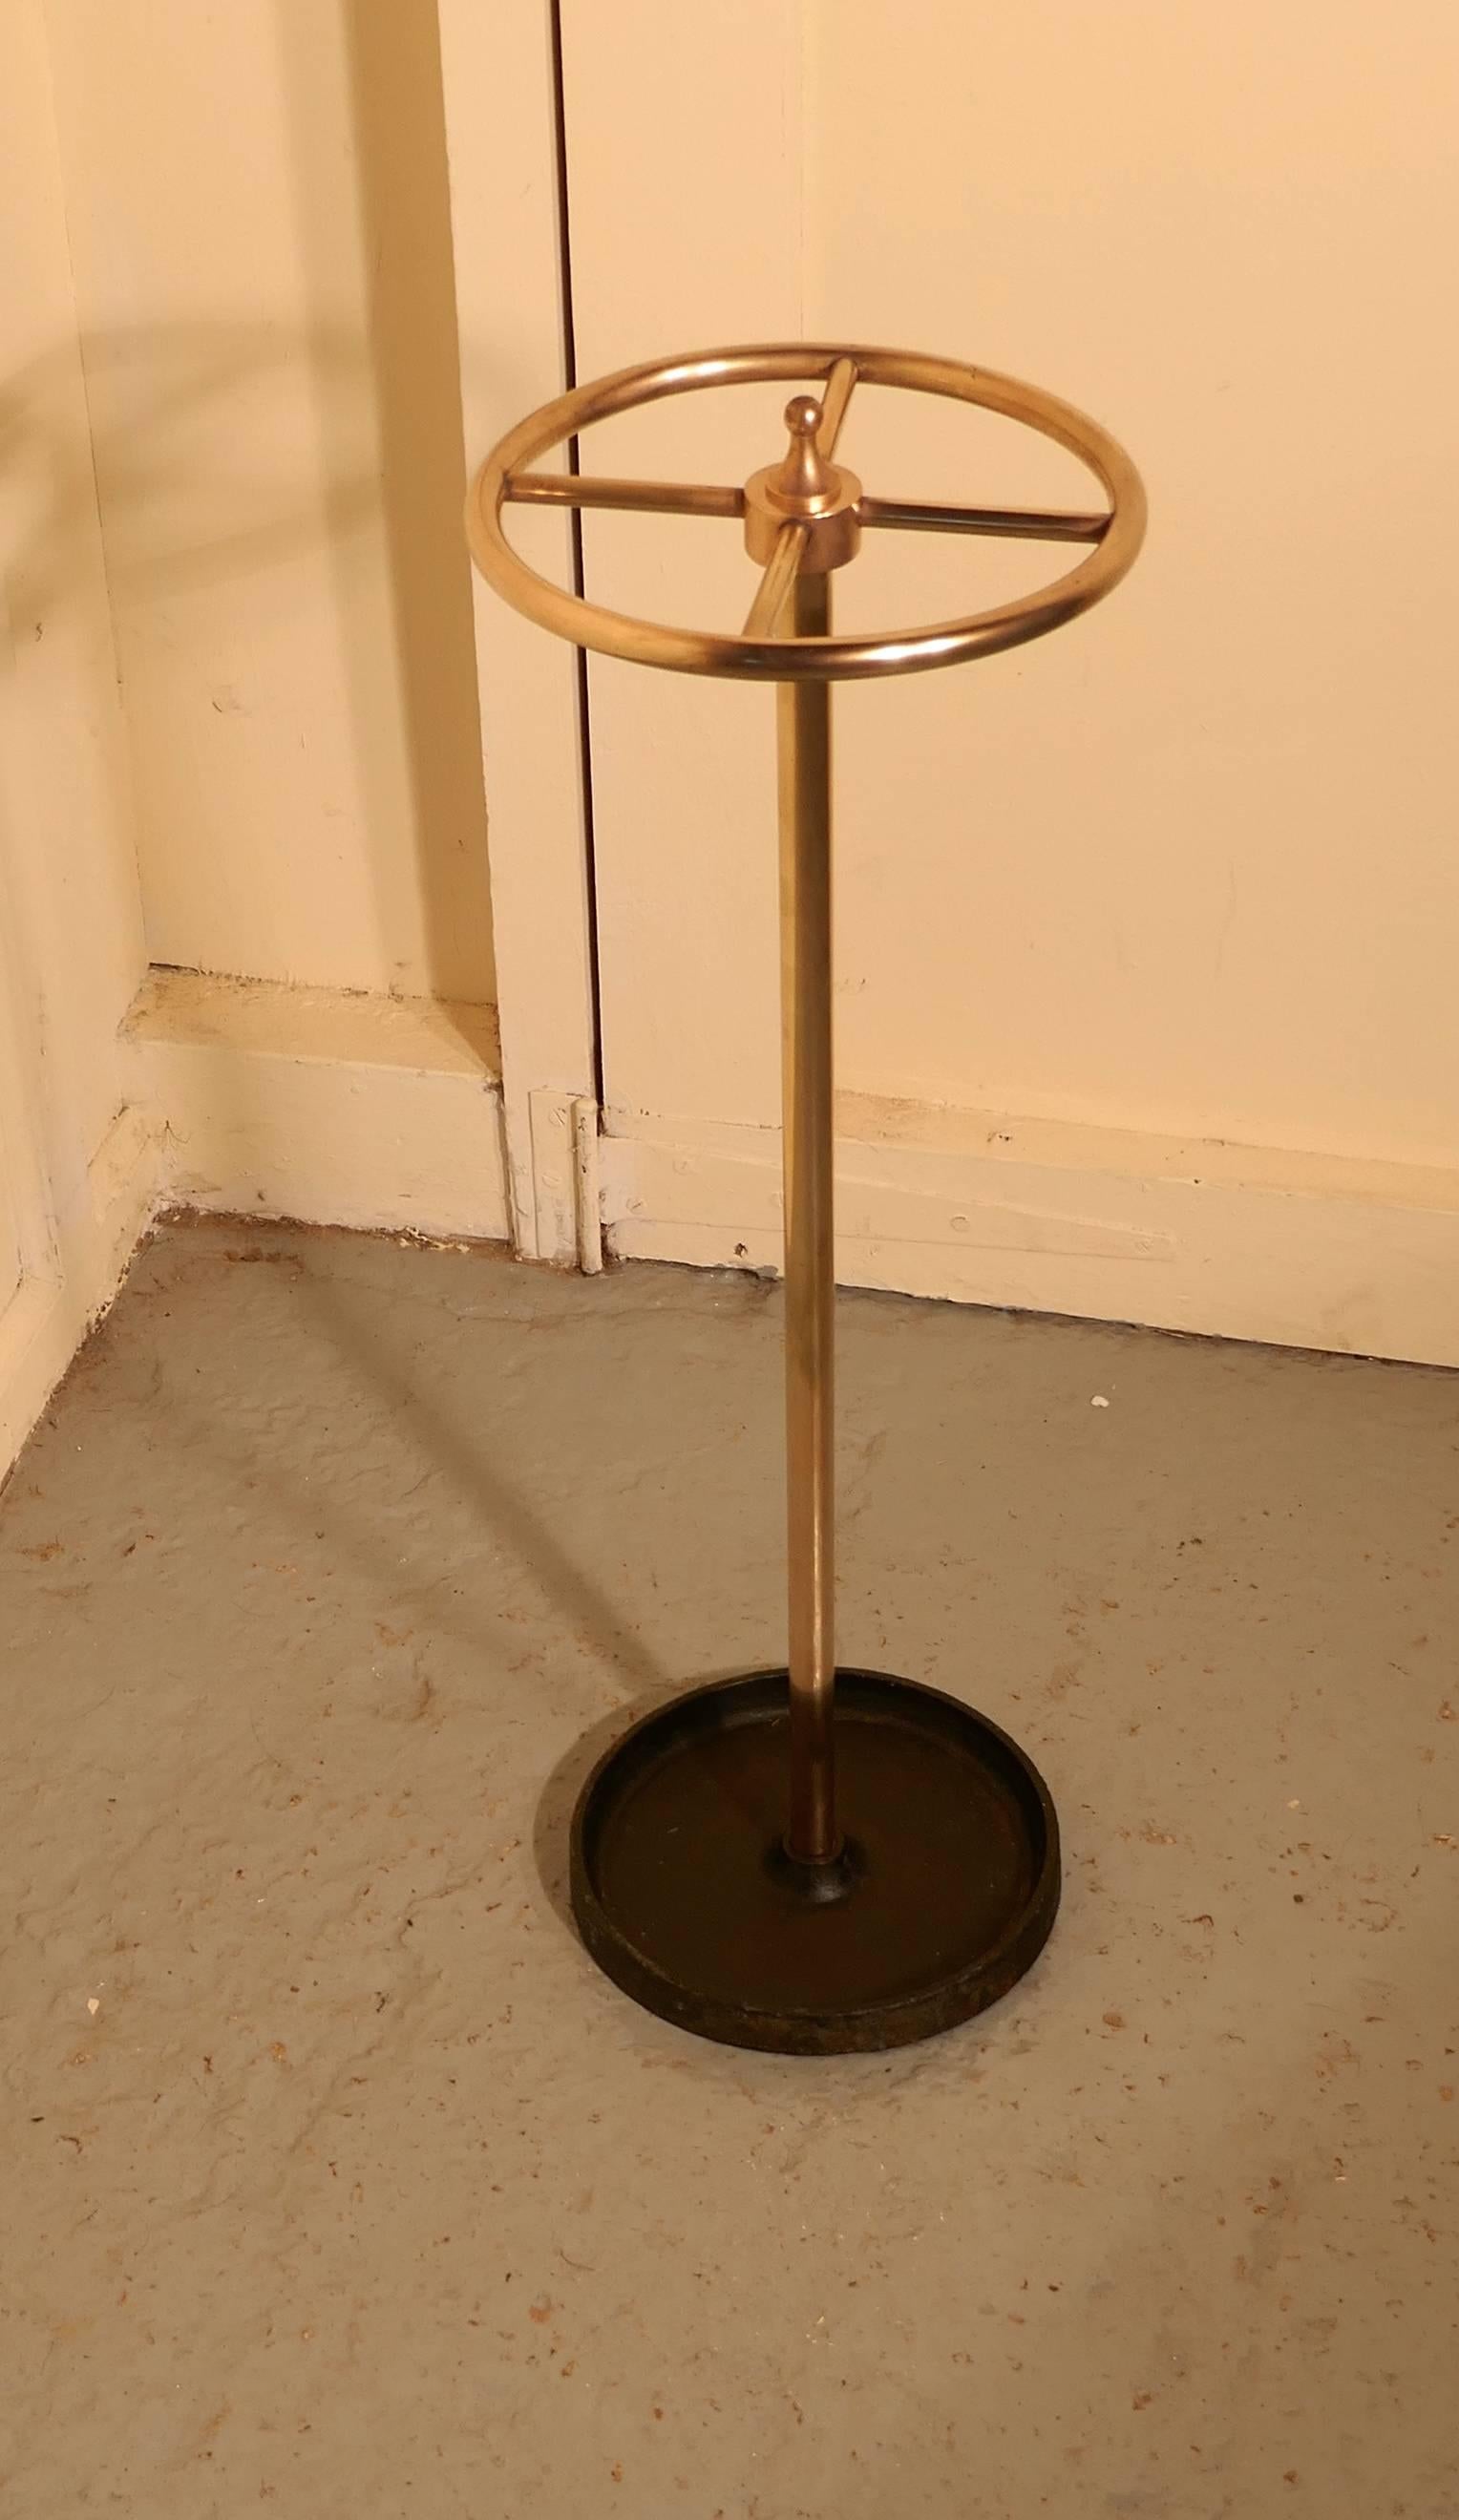 A Victorian brass and cast iron walking stick stand or umbrella stand

A charming piece, the stand is an unusual circular shape, it has a brass top divided into four sections to hold either walking sticks or umbrellas, the heavy iron base is also